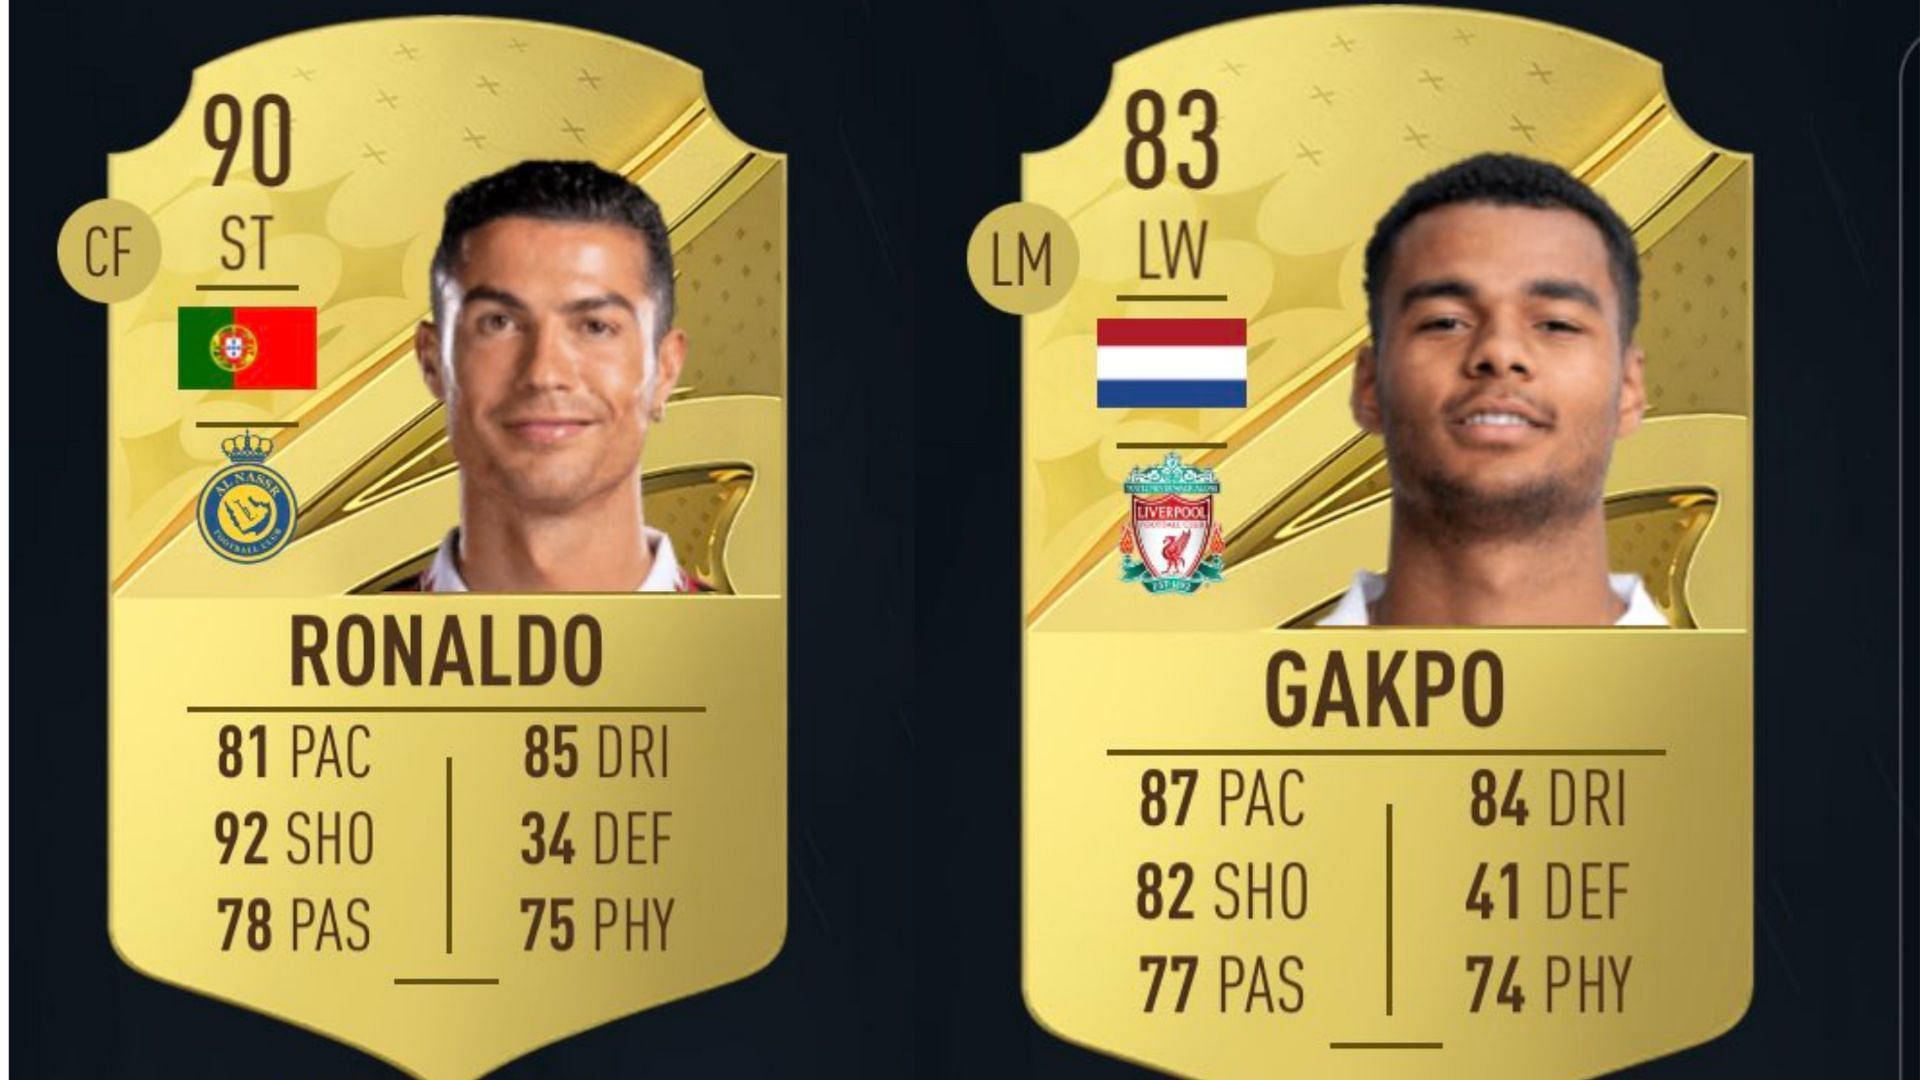 The two cards have been updated with the latest teams (Images via Twitter/FUT sheriff)